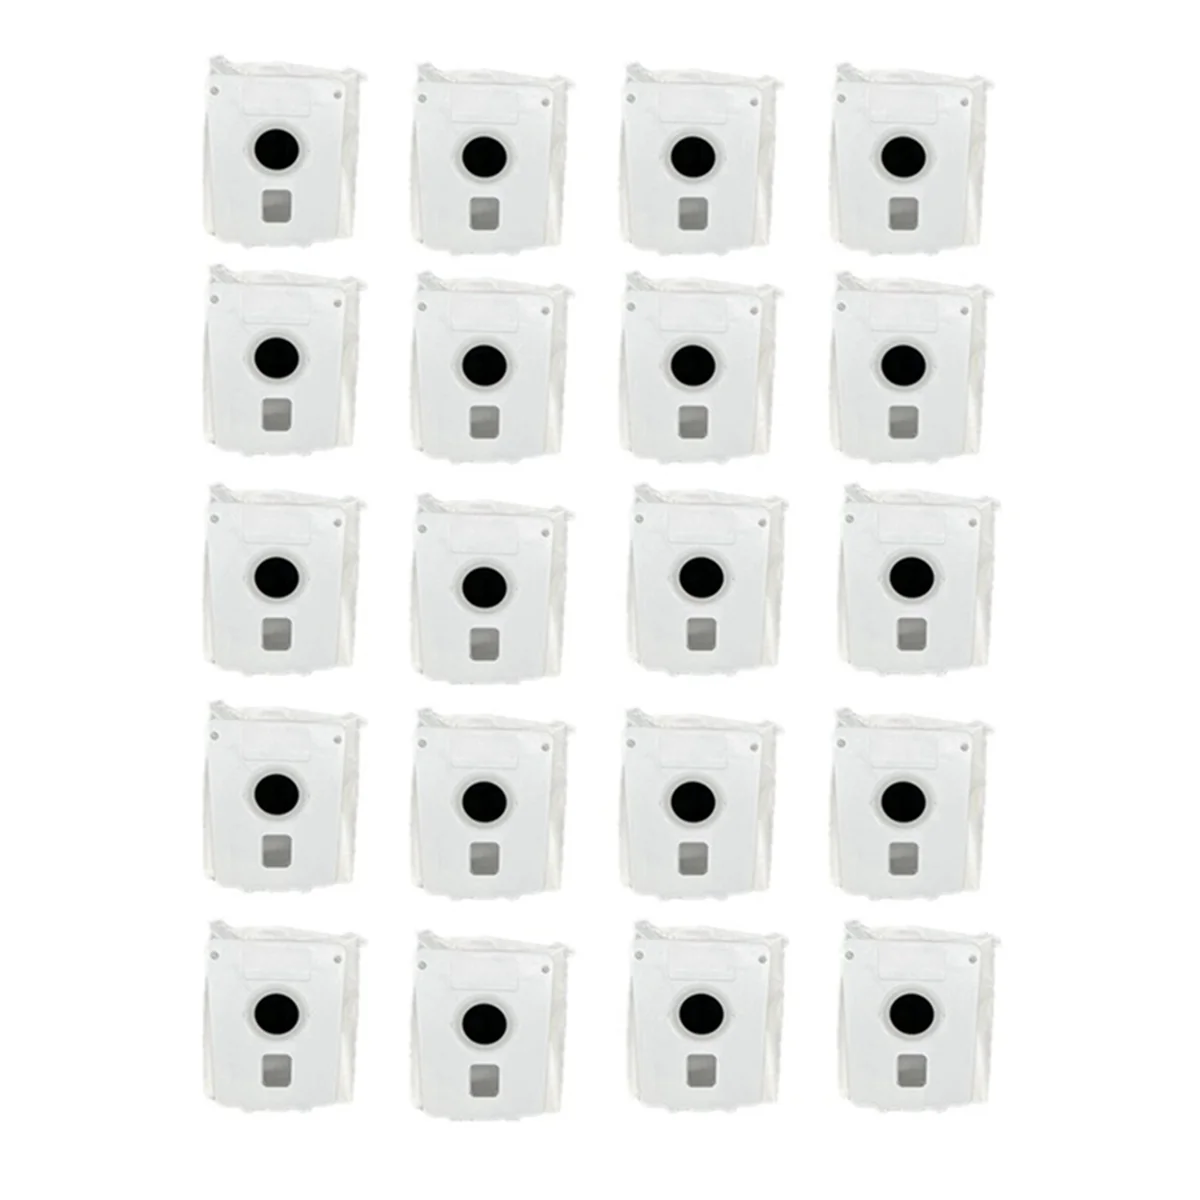 

20Pack Replacement Dust Bags for LG CordZero All-In-1 Tower A939KBGS, A938KBGS and A937KGMS